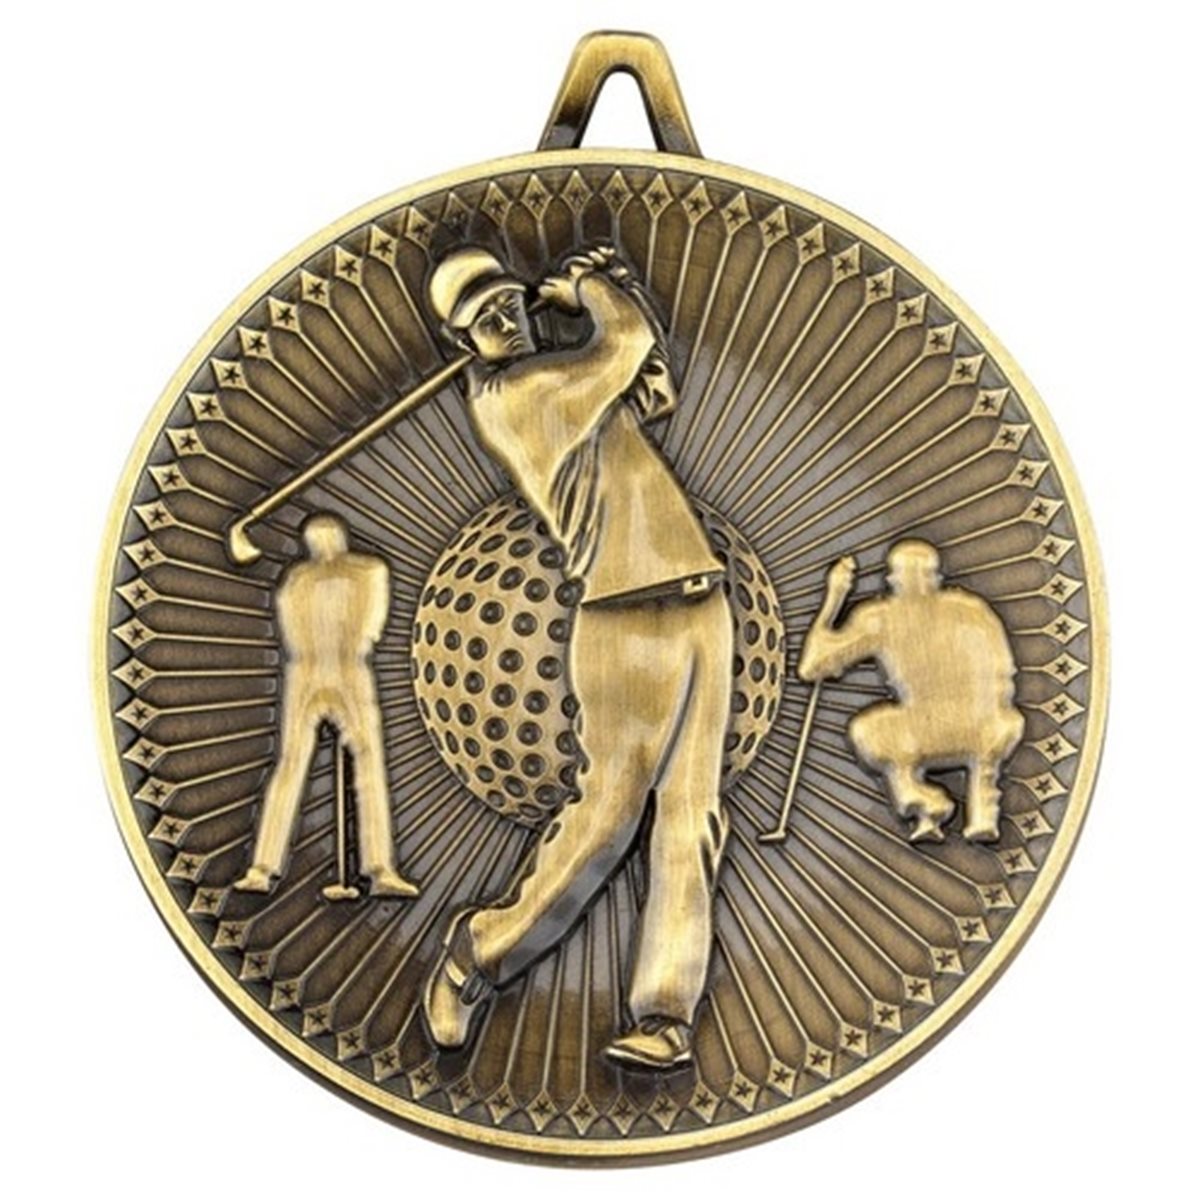 60mm Deluxe Golf Medal DM02 in Gold, Silver & Bronze